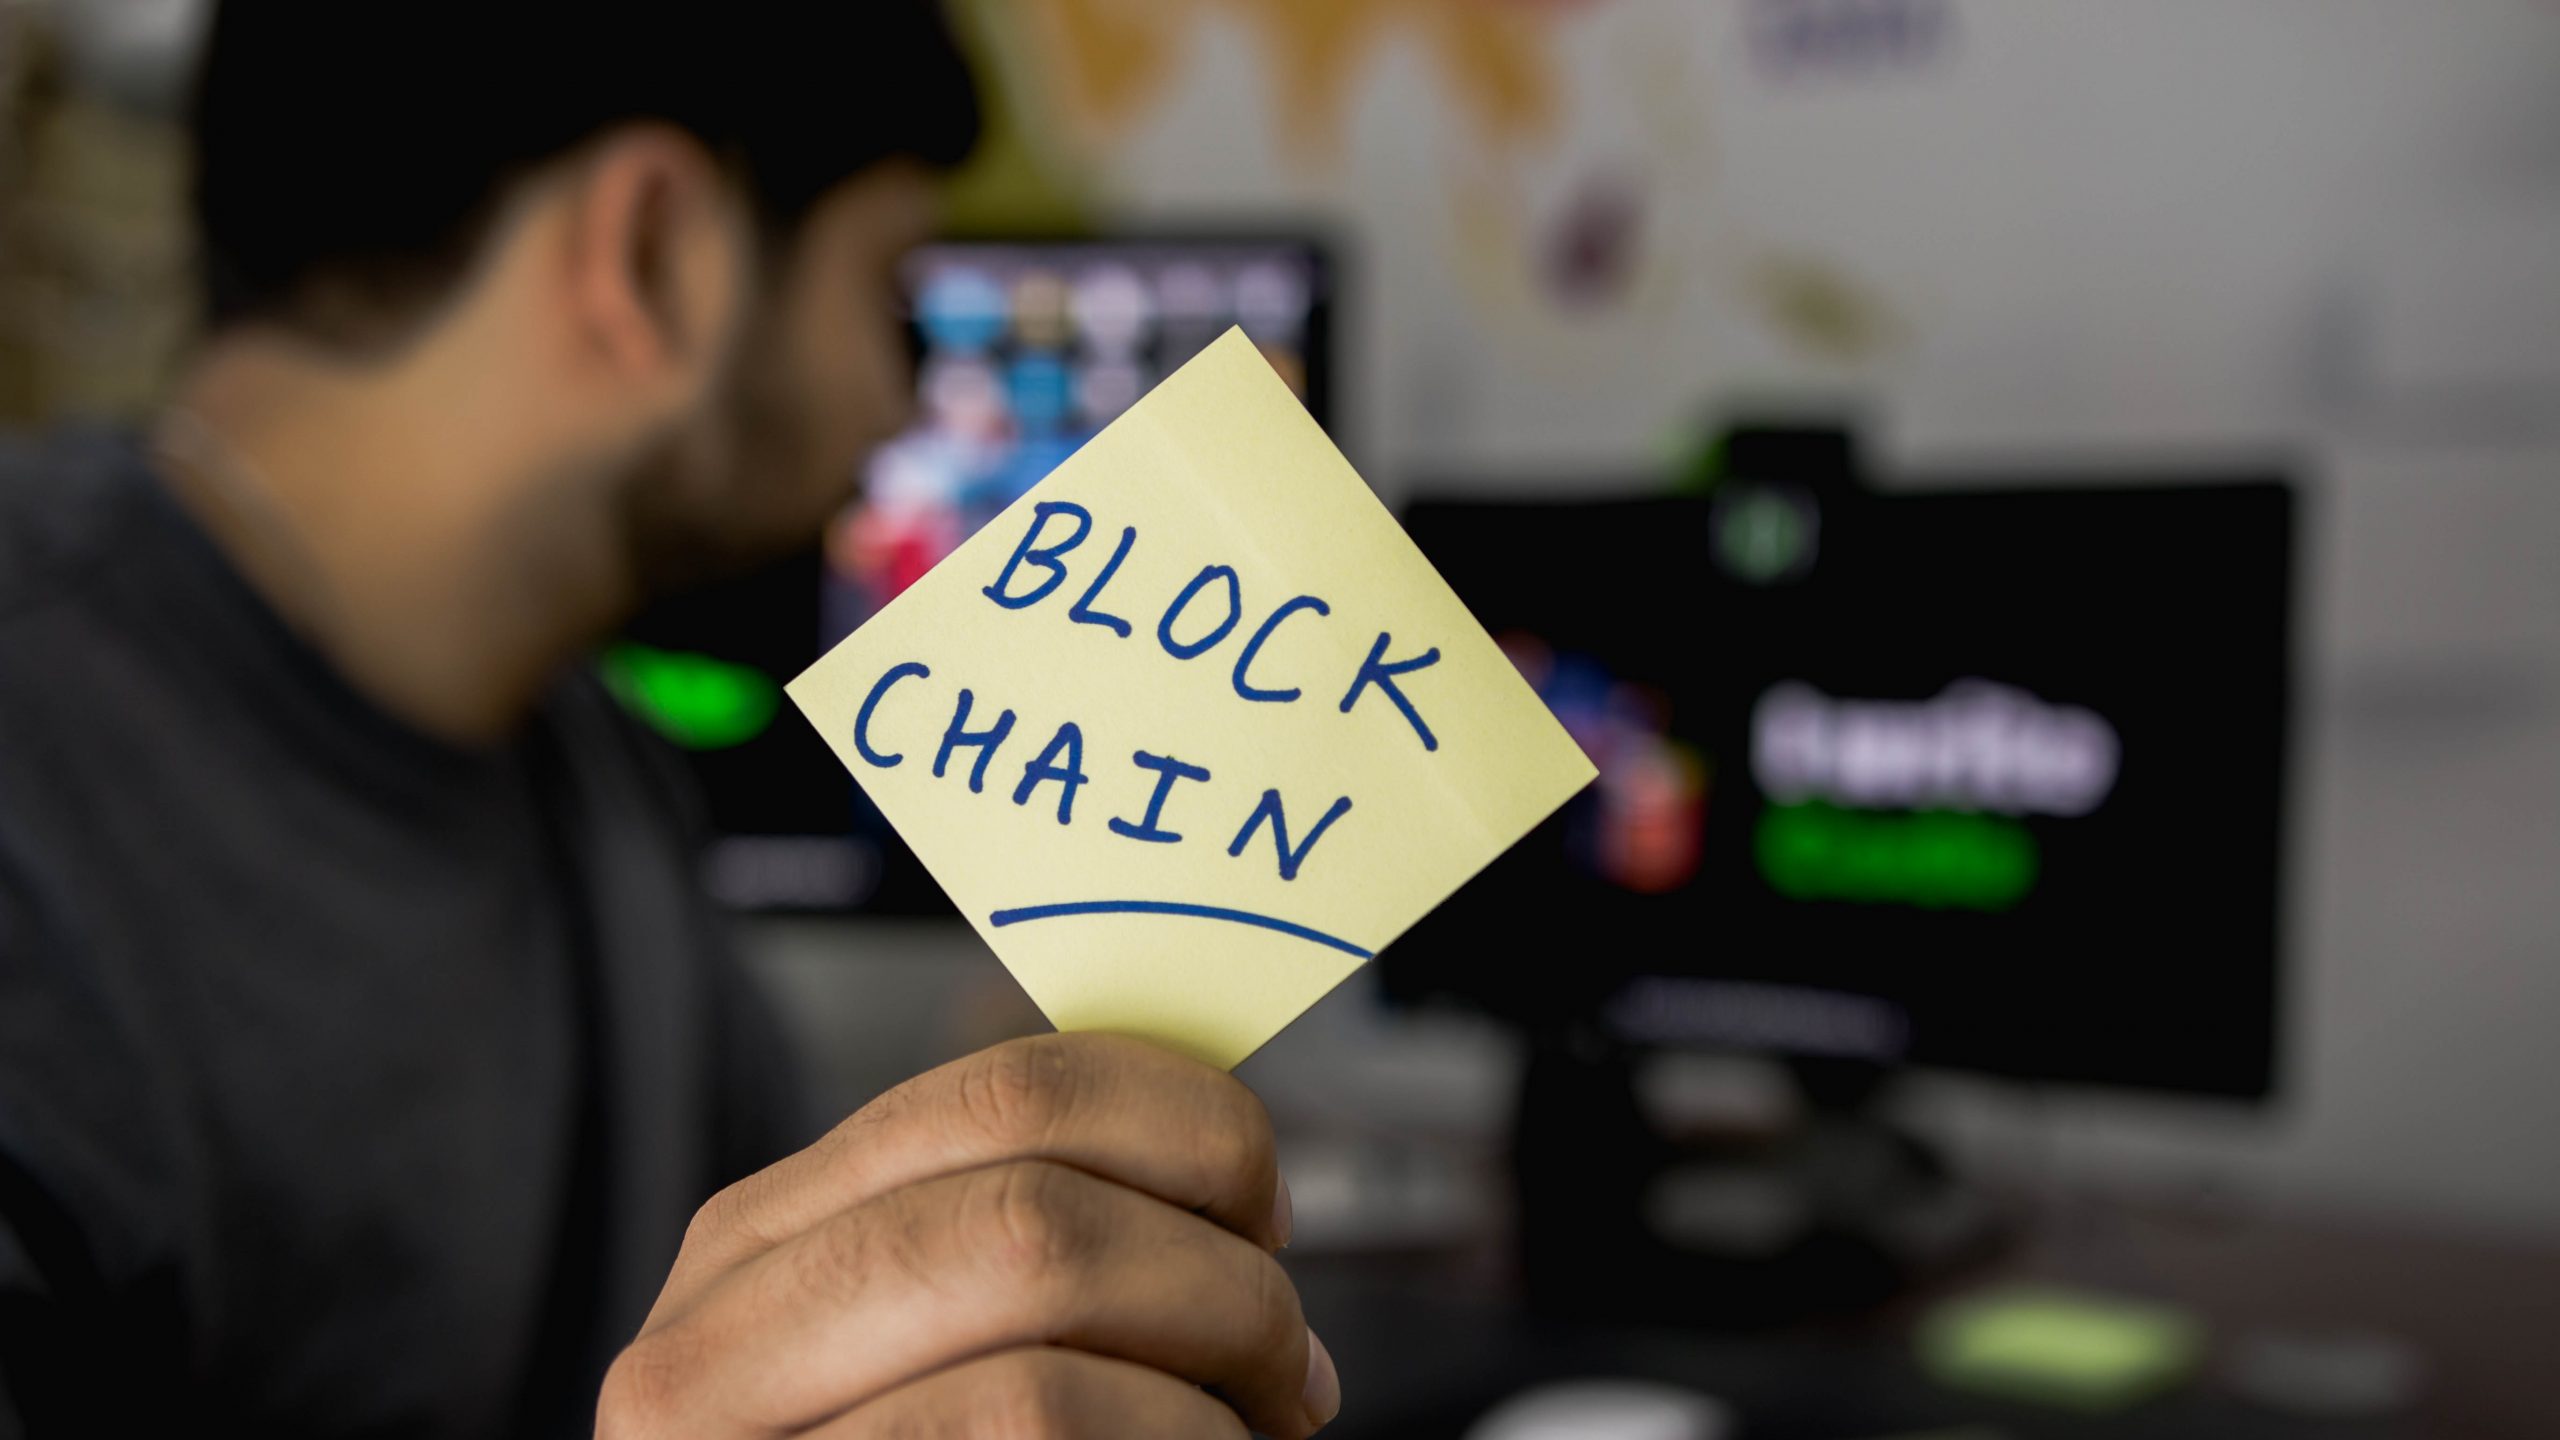  Enterprise Blockchain Solutions: What Can They Do For Your Business?